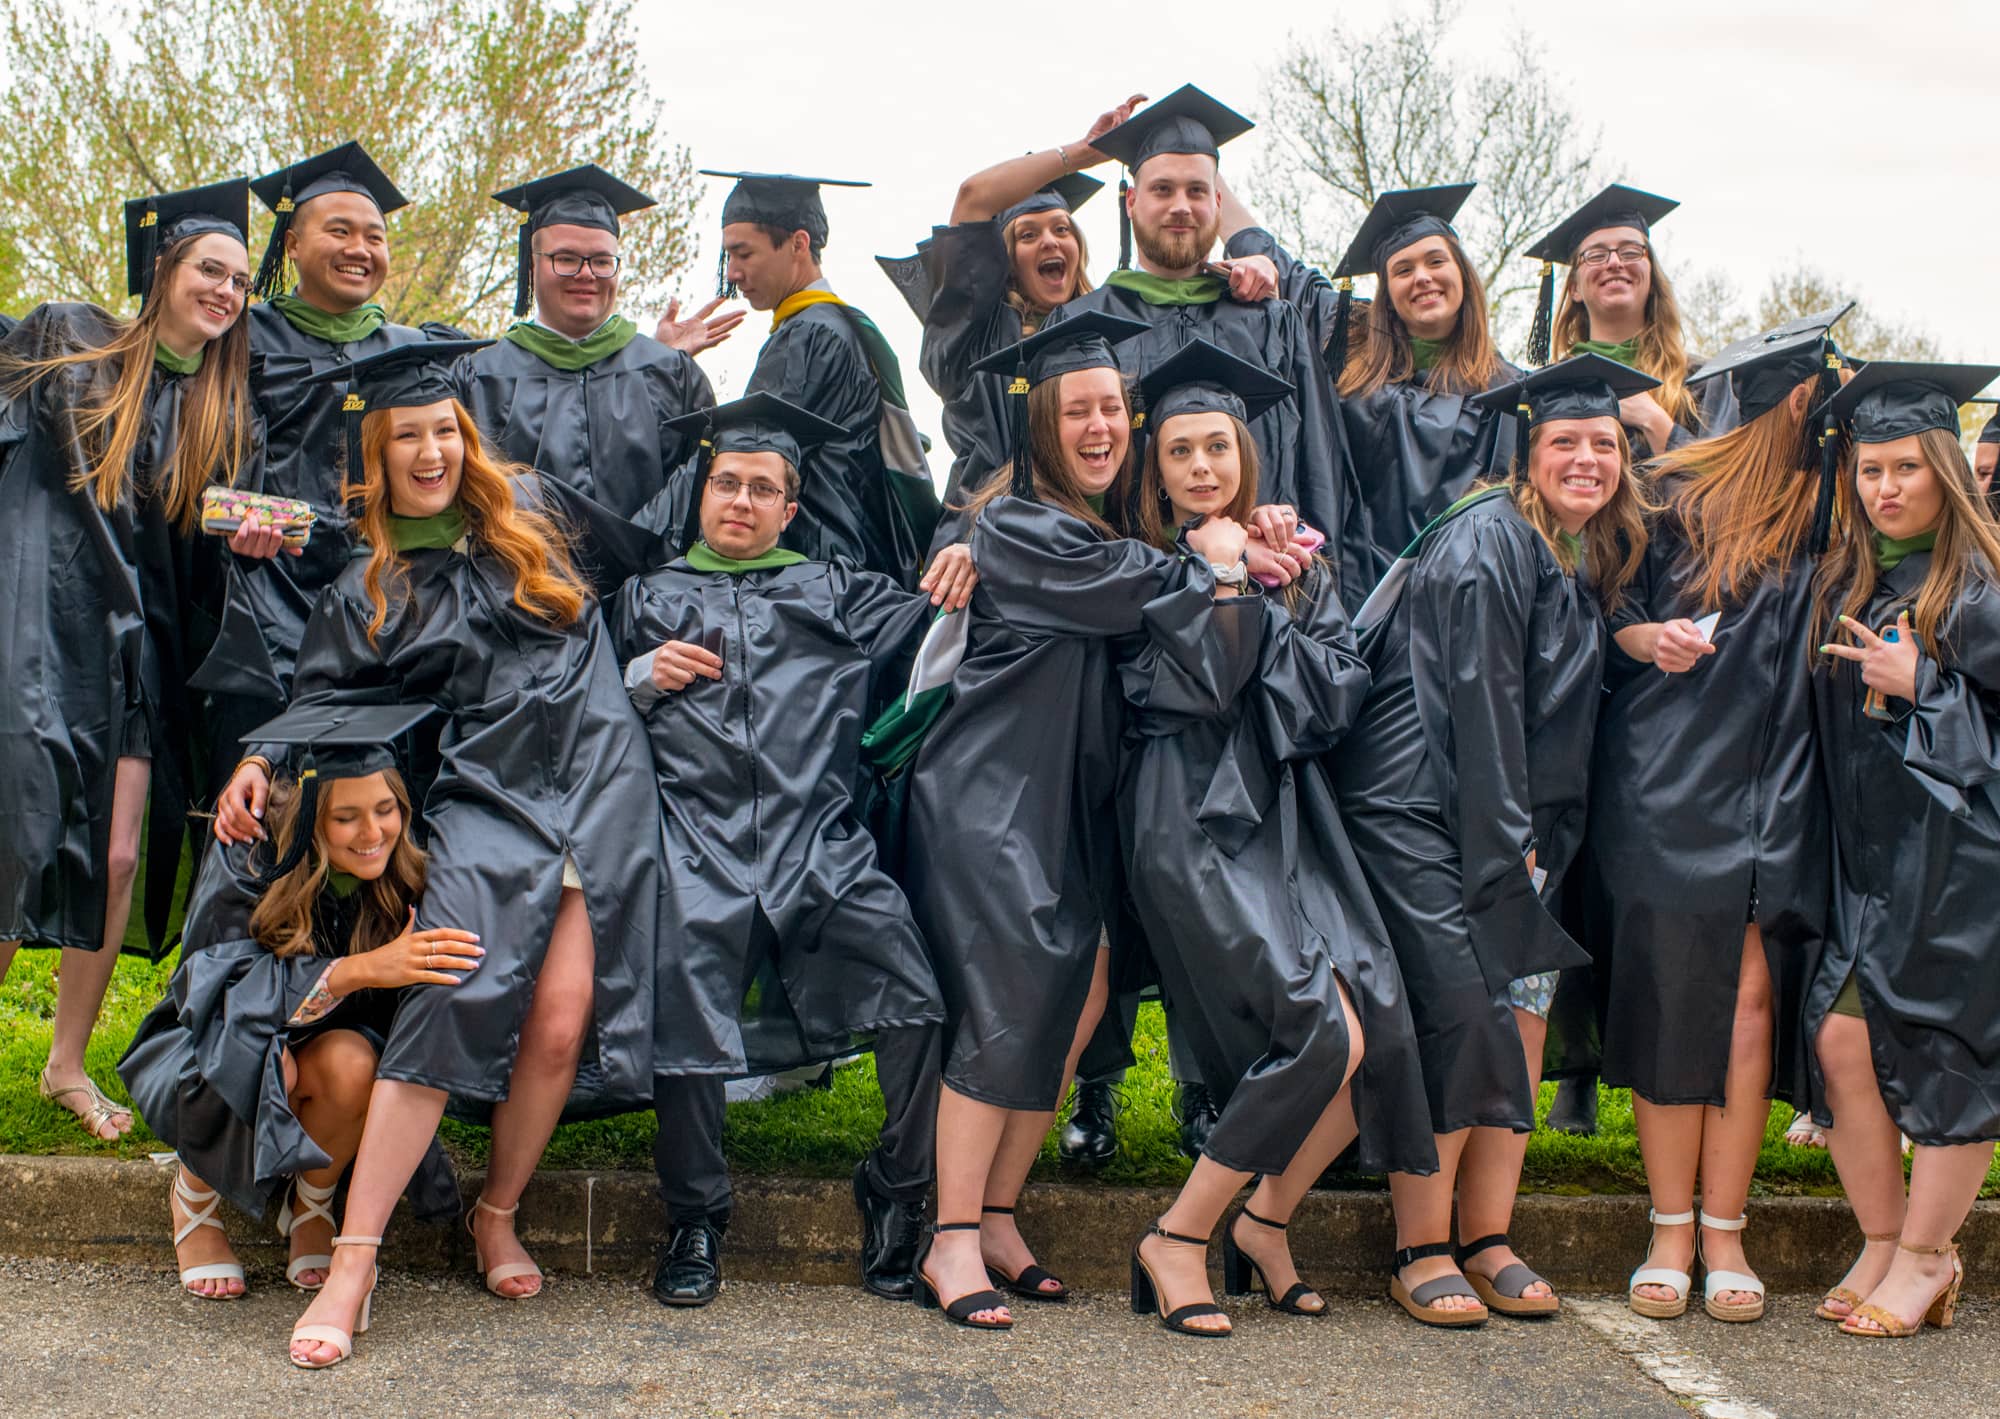 Students pose for a photo prior to graduate commencement at the Convocation Center in Athens.